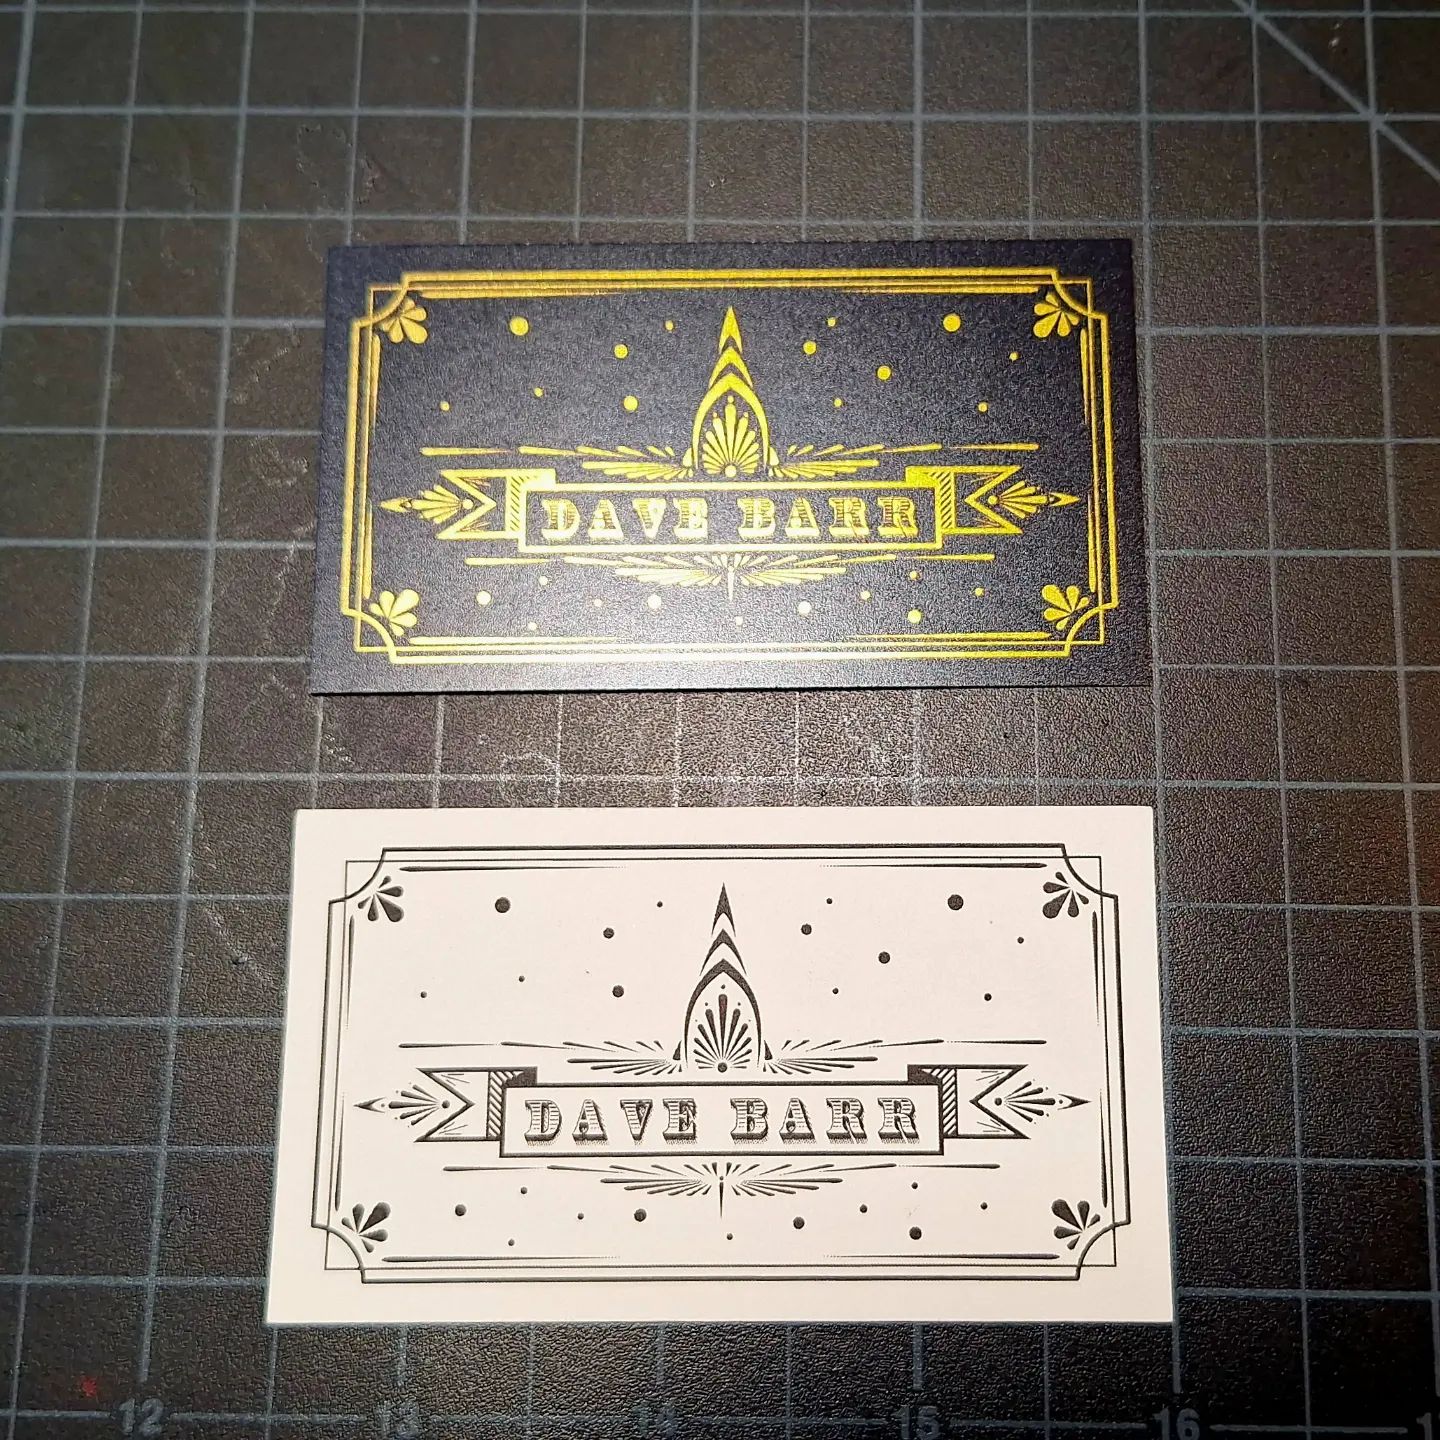 A while ago I got bored and made a business card, hard to see the gold foil version so I posted the black and white version for clarity.